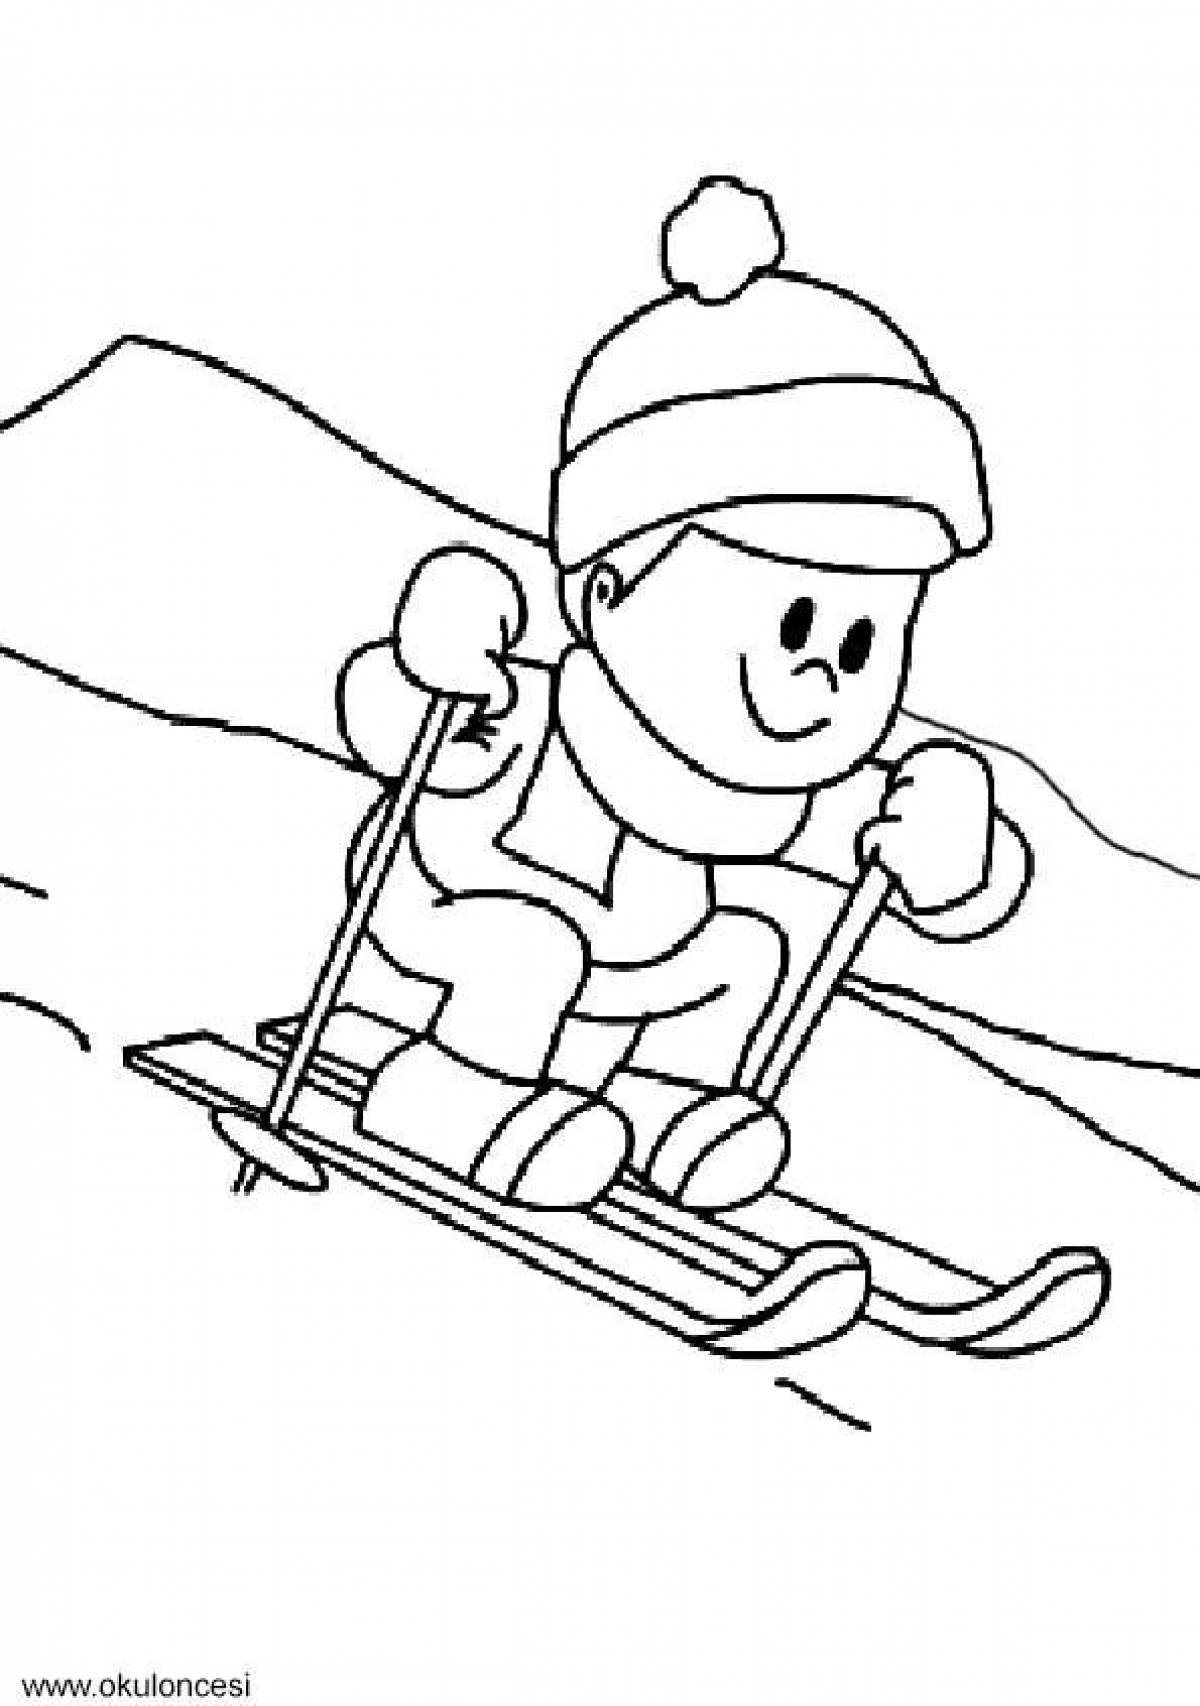 Coloring page wild skier